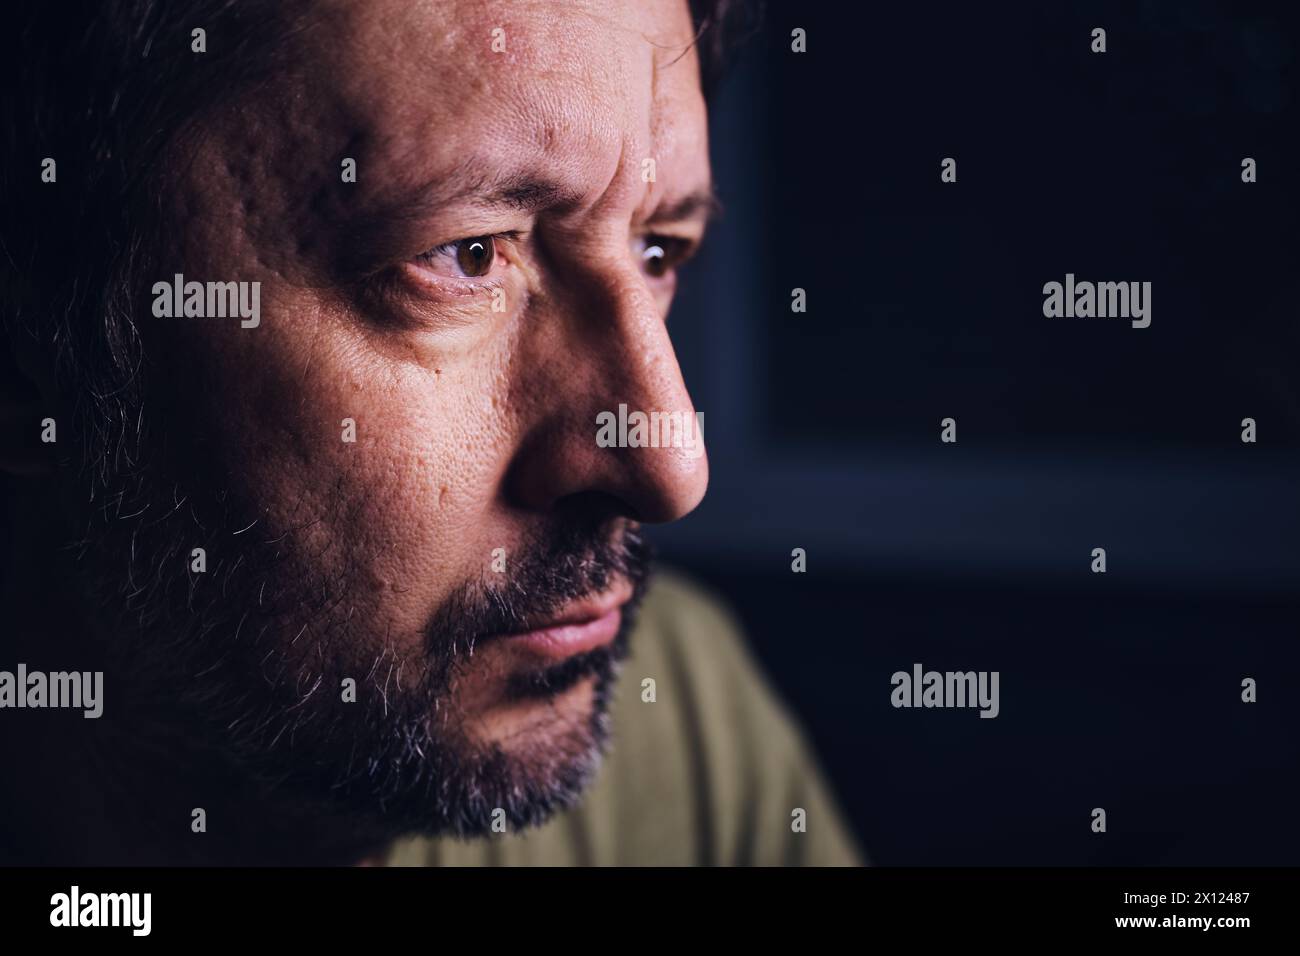 Concerned man, portrait of adult male looking at device screen at night, hearing bad news on television, low key with selective focus Stock Photo